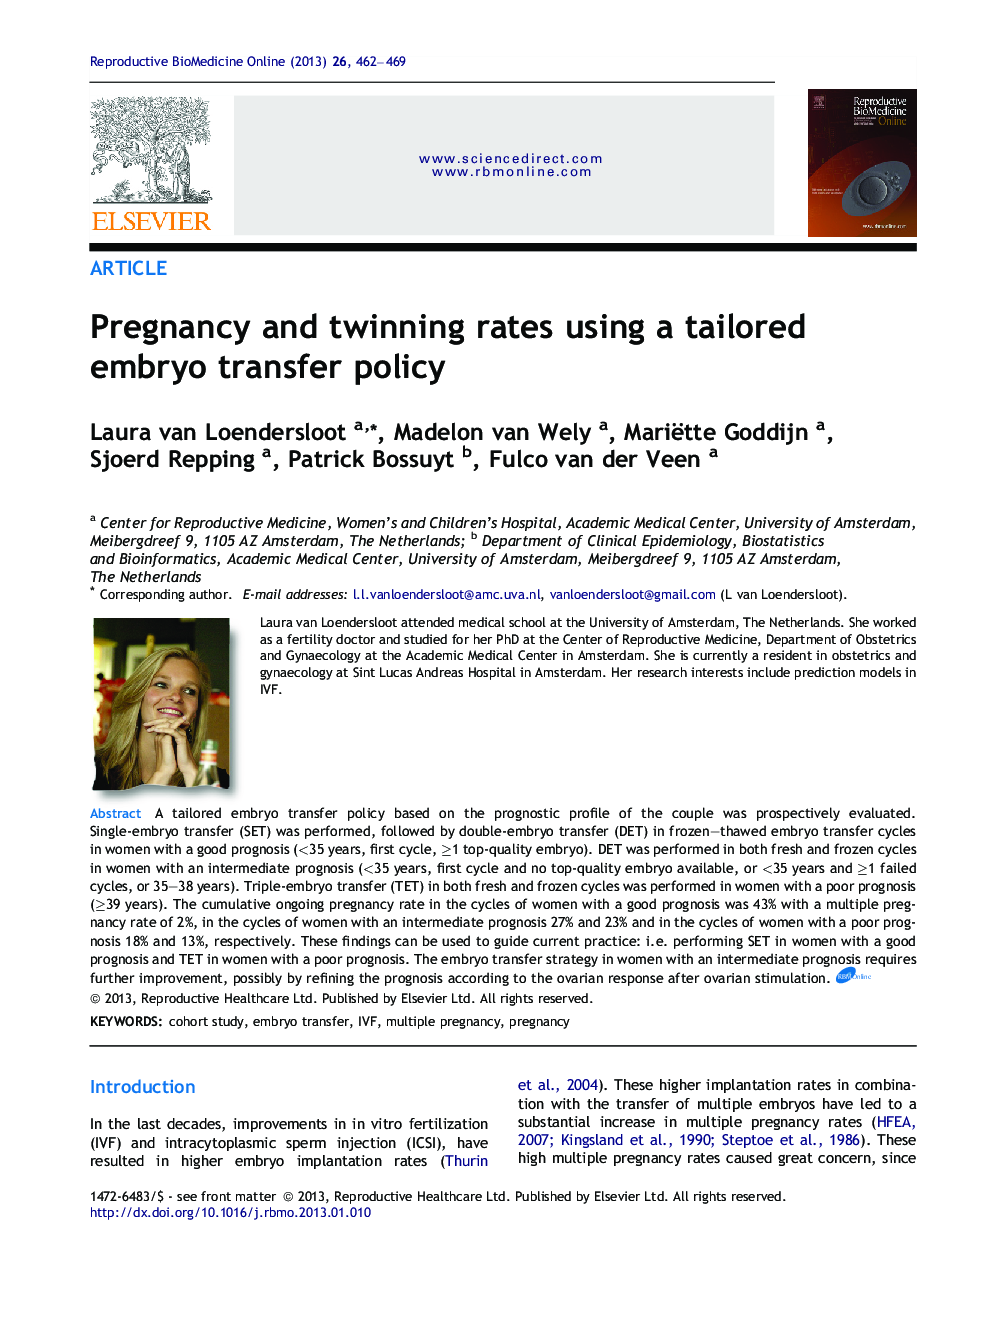 Pregnancy and twinning rates using a tailored embryo transfer policy